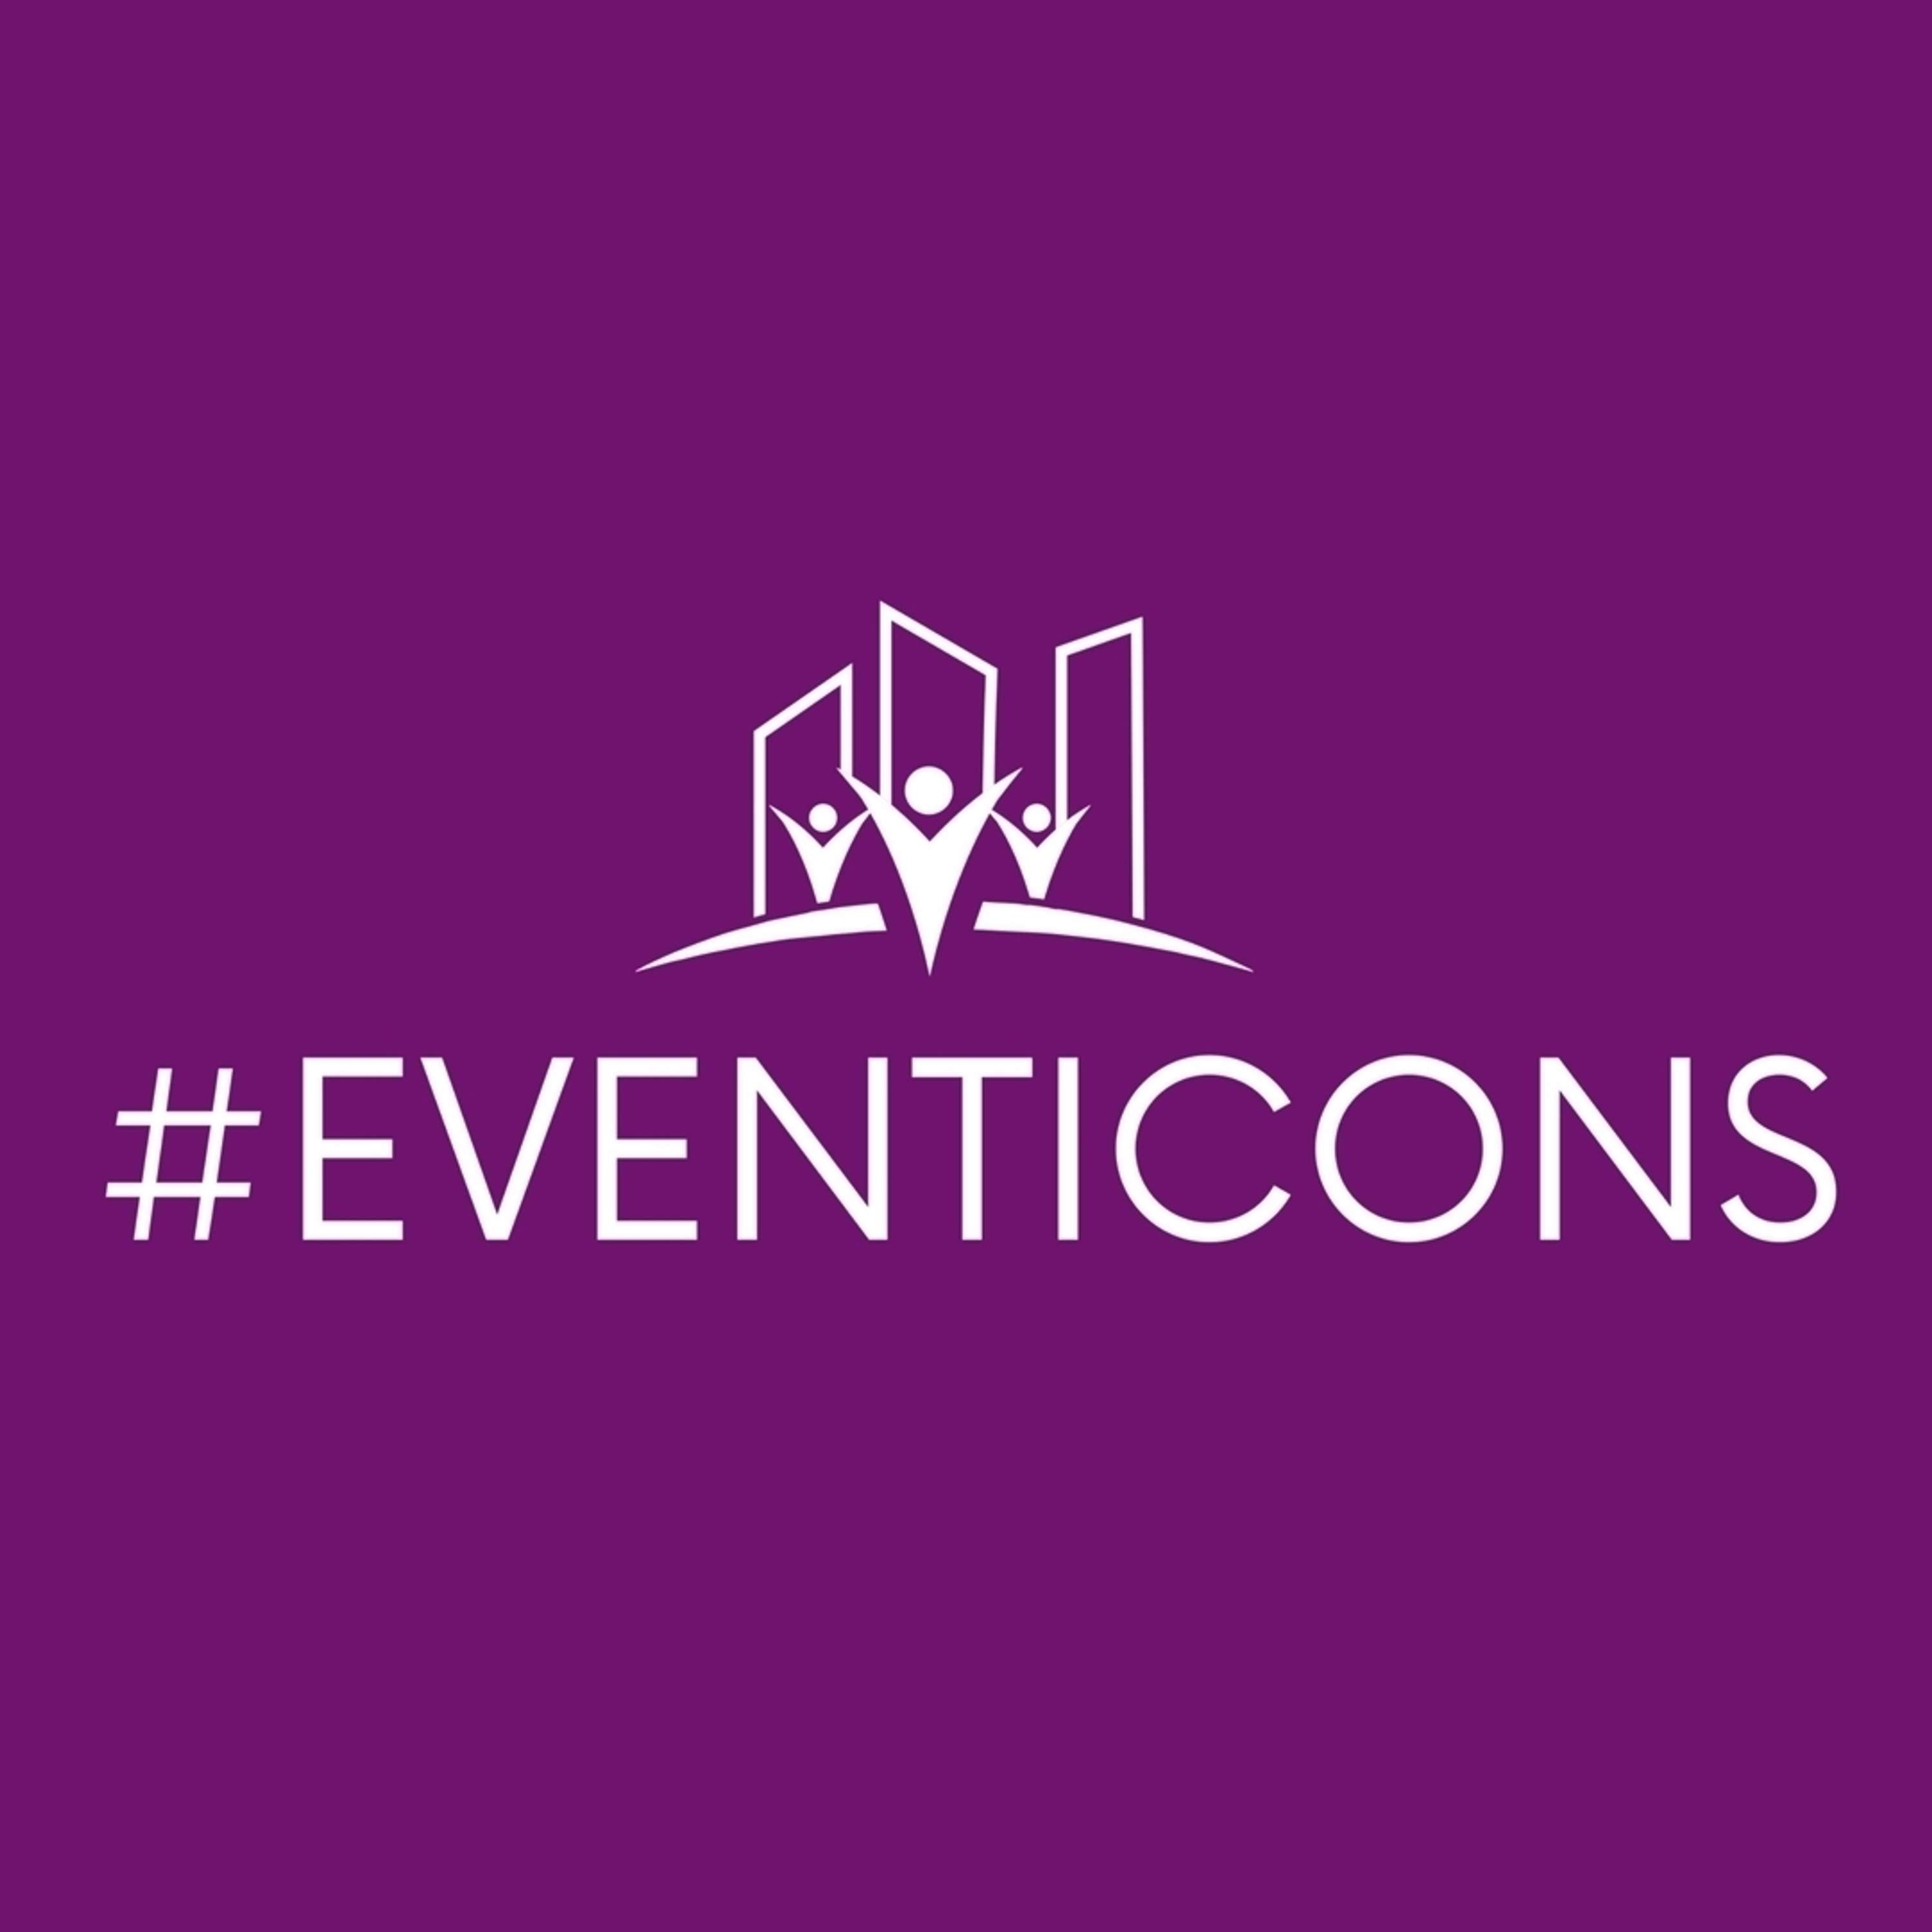 #EventIcons 2020 Sneak Peek: New Year, New Content!